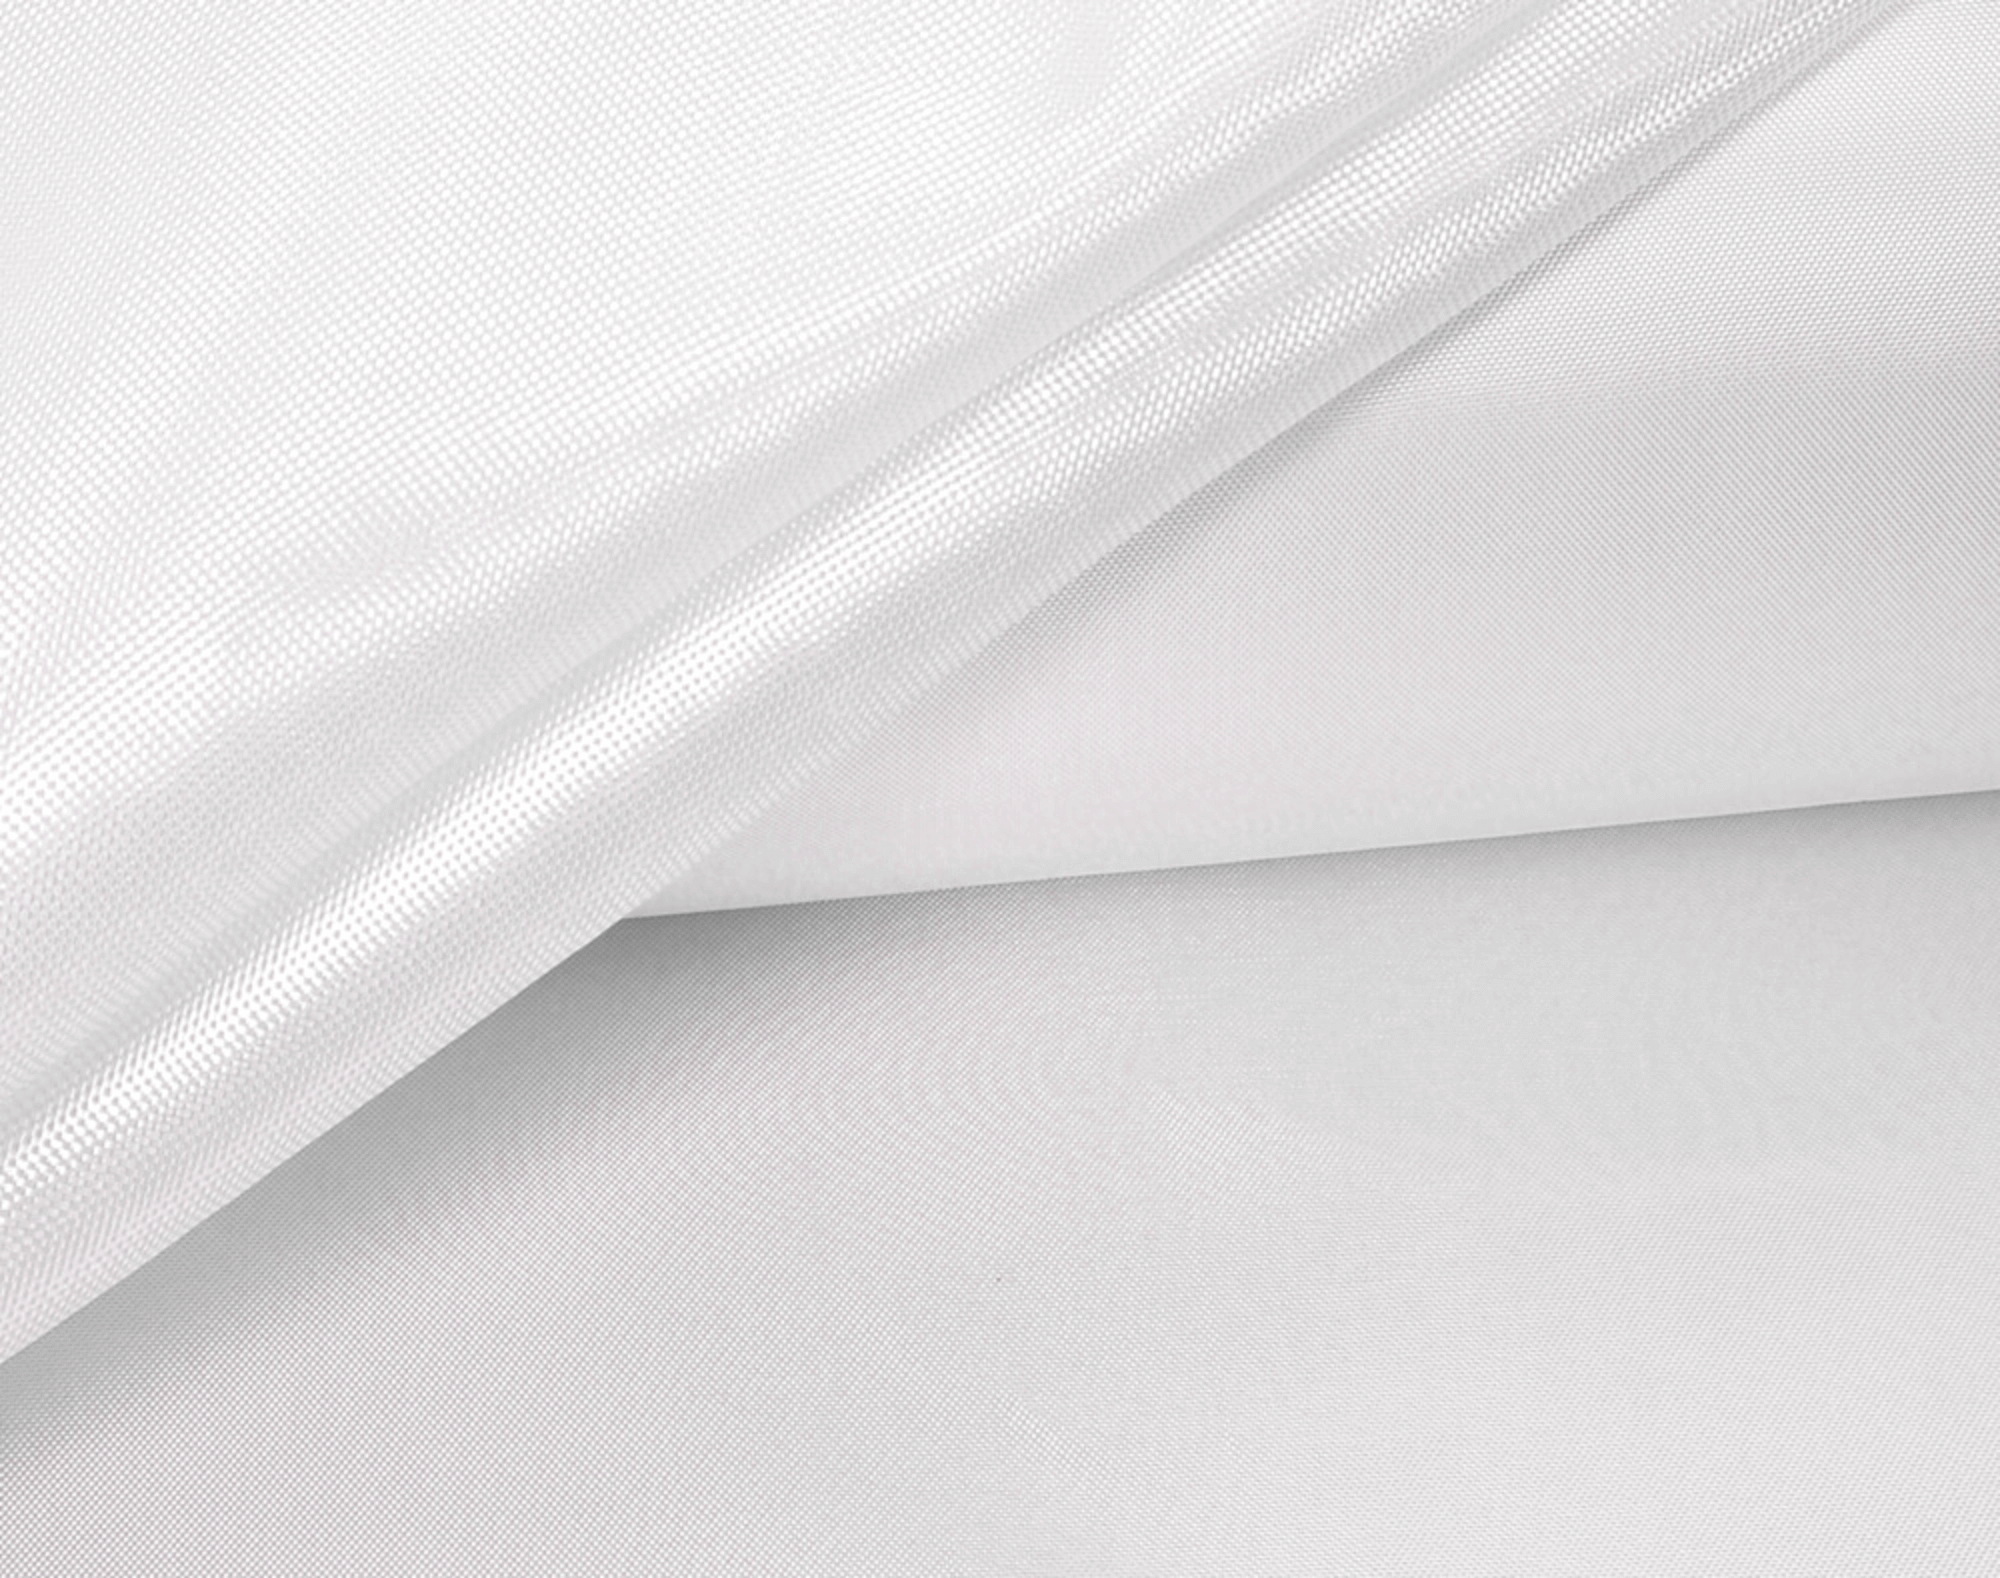 A close up image of a white sheet made of stainless steel.